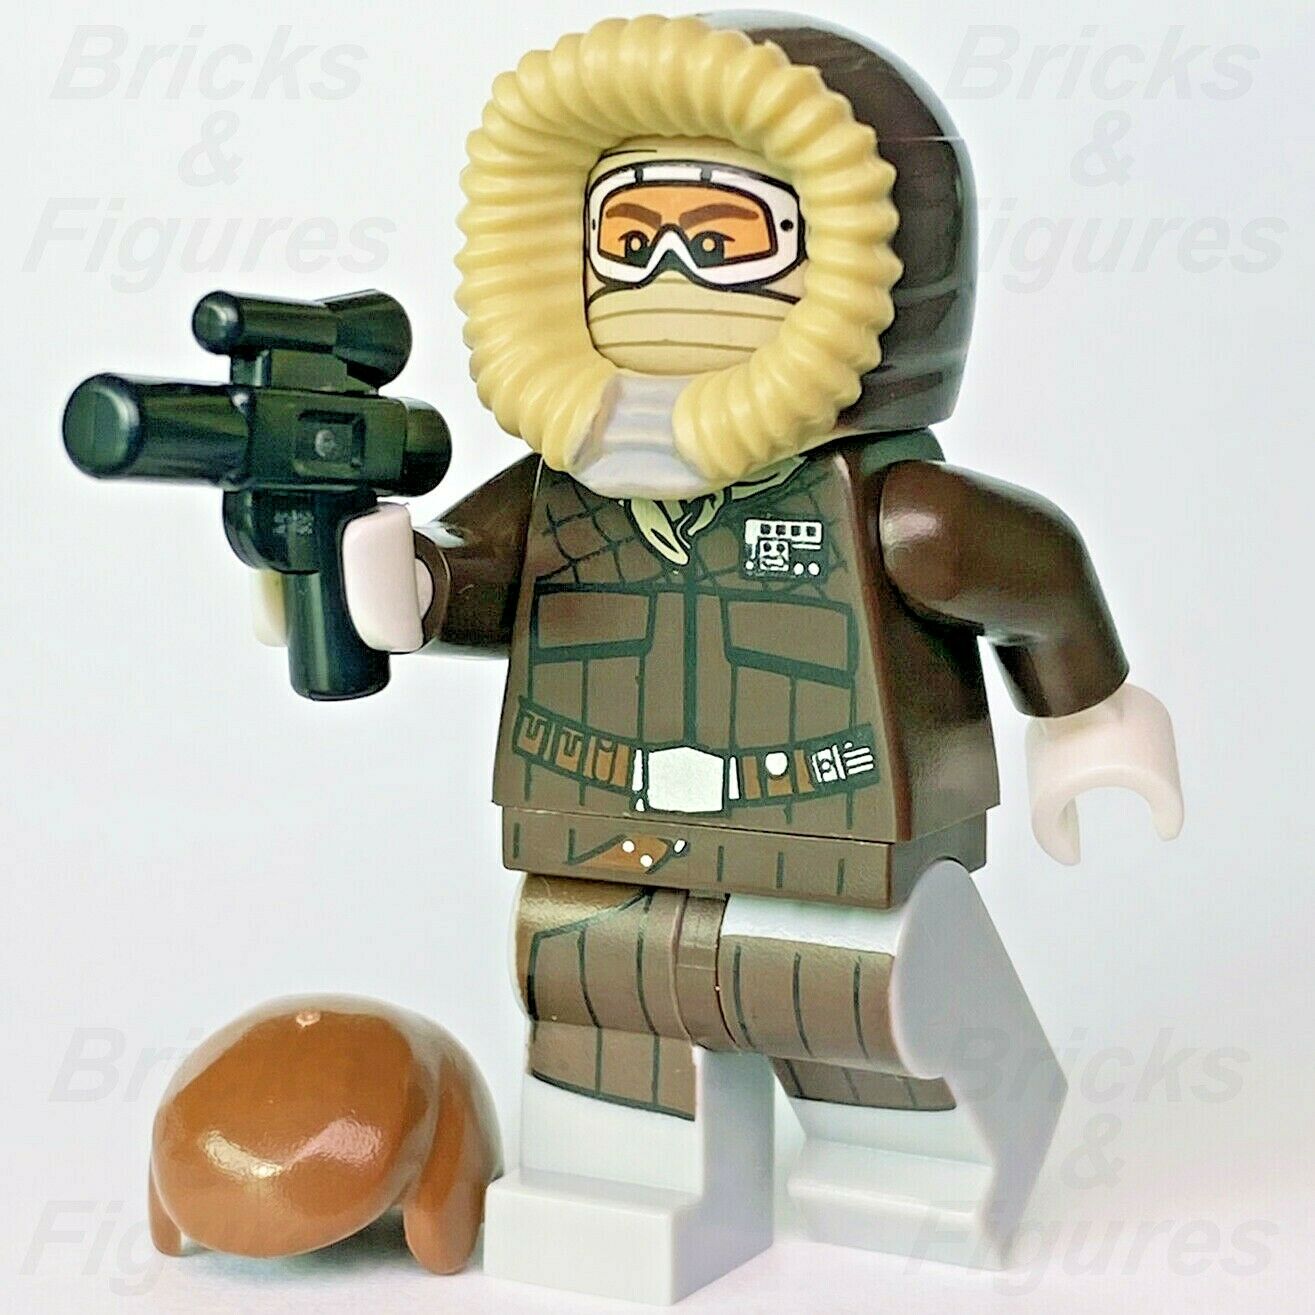 Star Wars LEGO Han Solo Rebel Hoth Snow Goggles Outfit Minifigure 5001621 TESB - Bricks & Figures